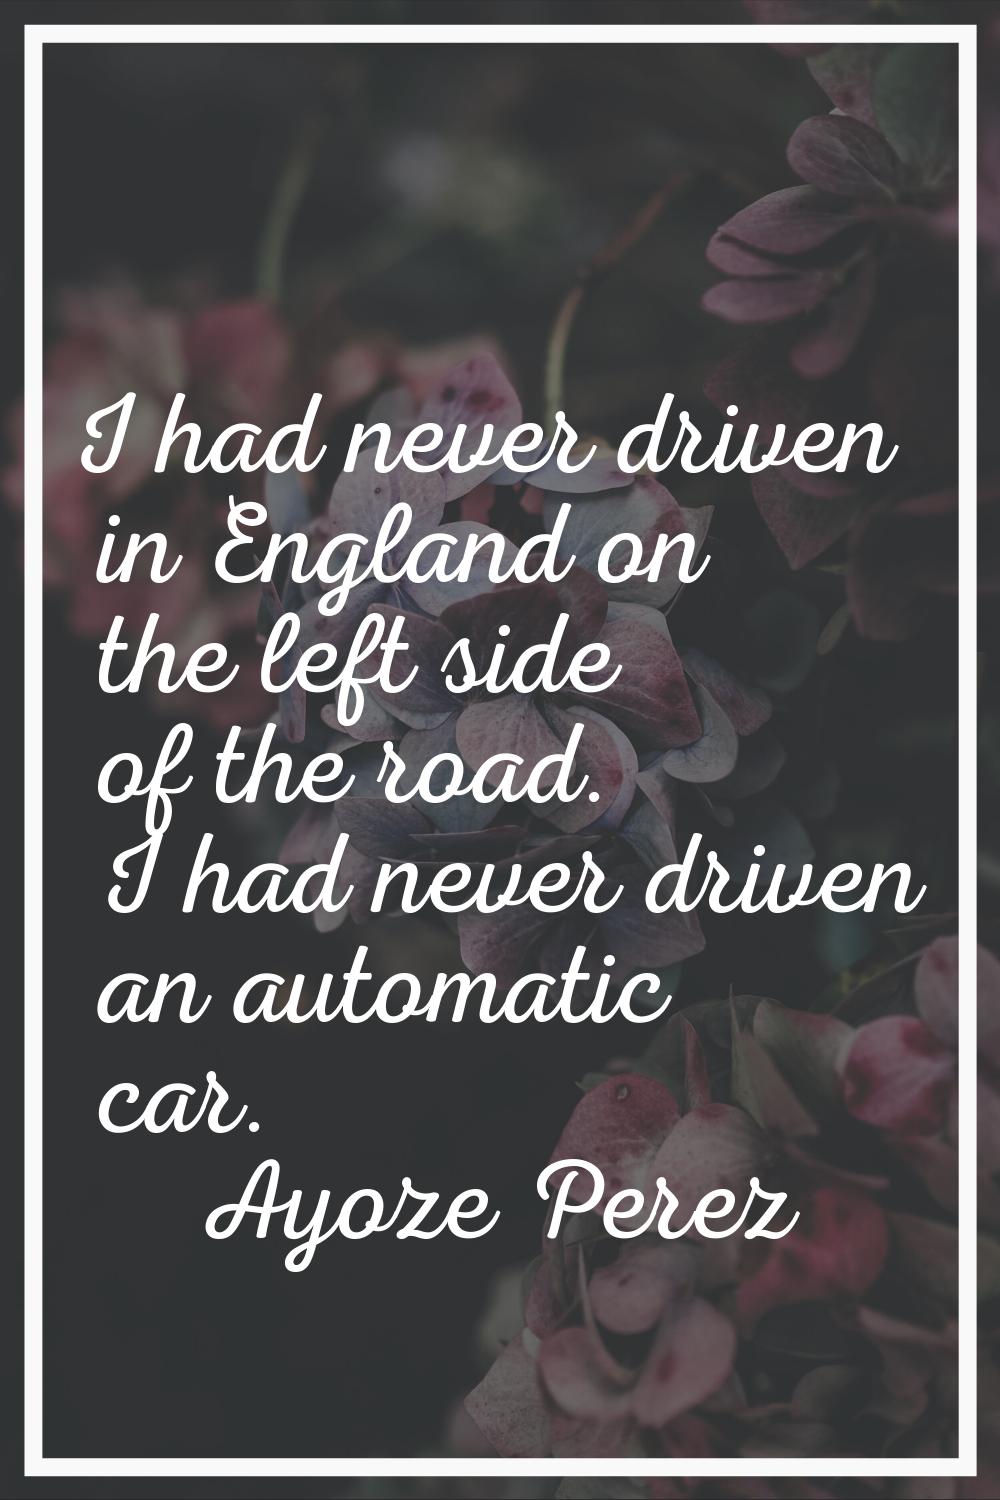 I had never driven in England on the left side of the road. I had never driven an automatic car.